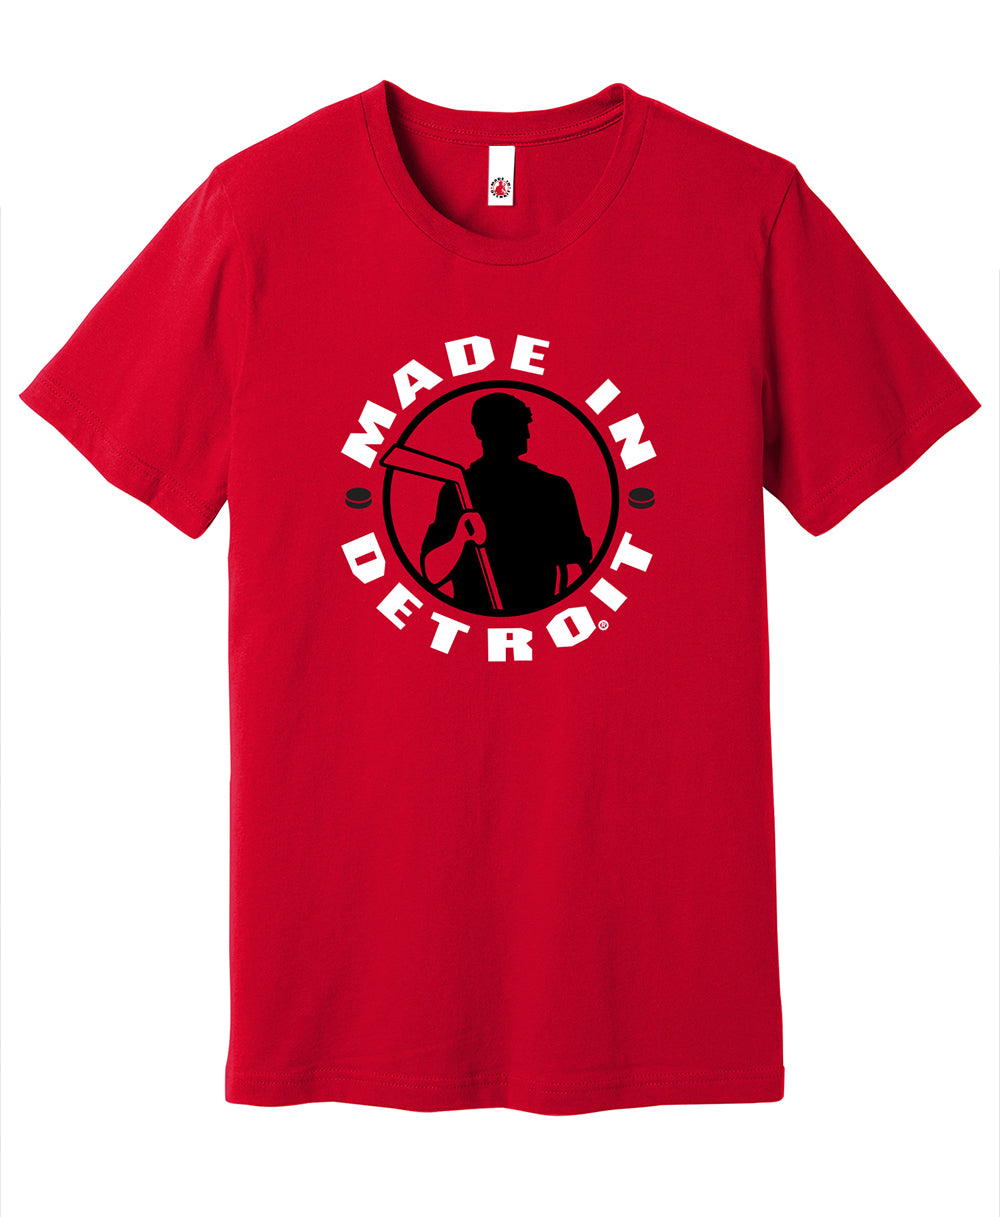 Made In Detroit Wrenchman holding a hockey stick. Printed in black/white on Red T-shirt